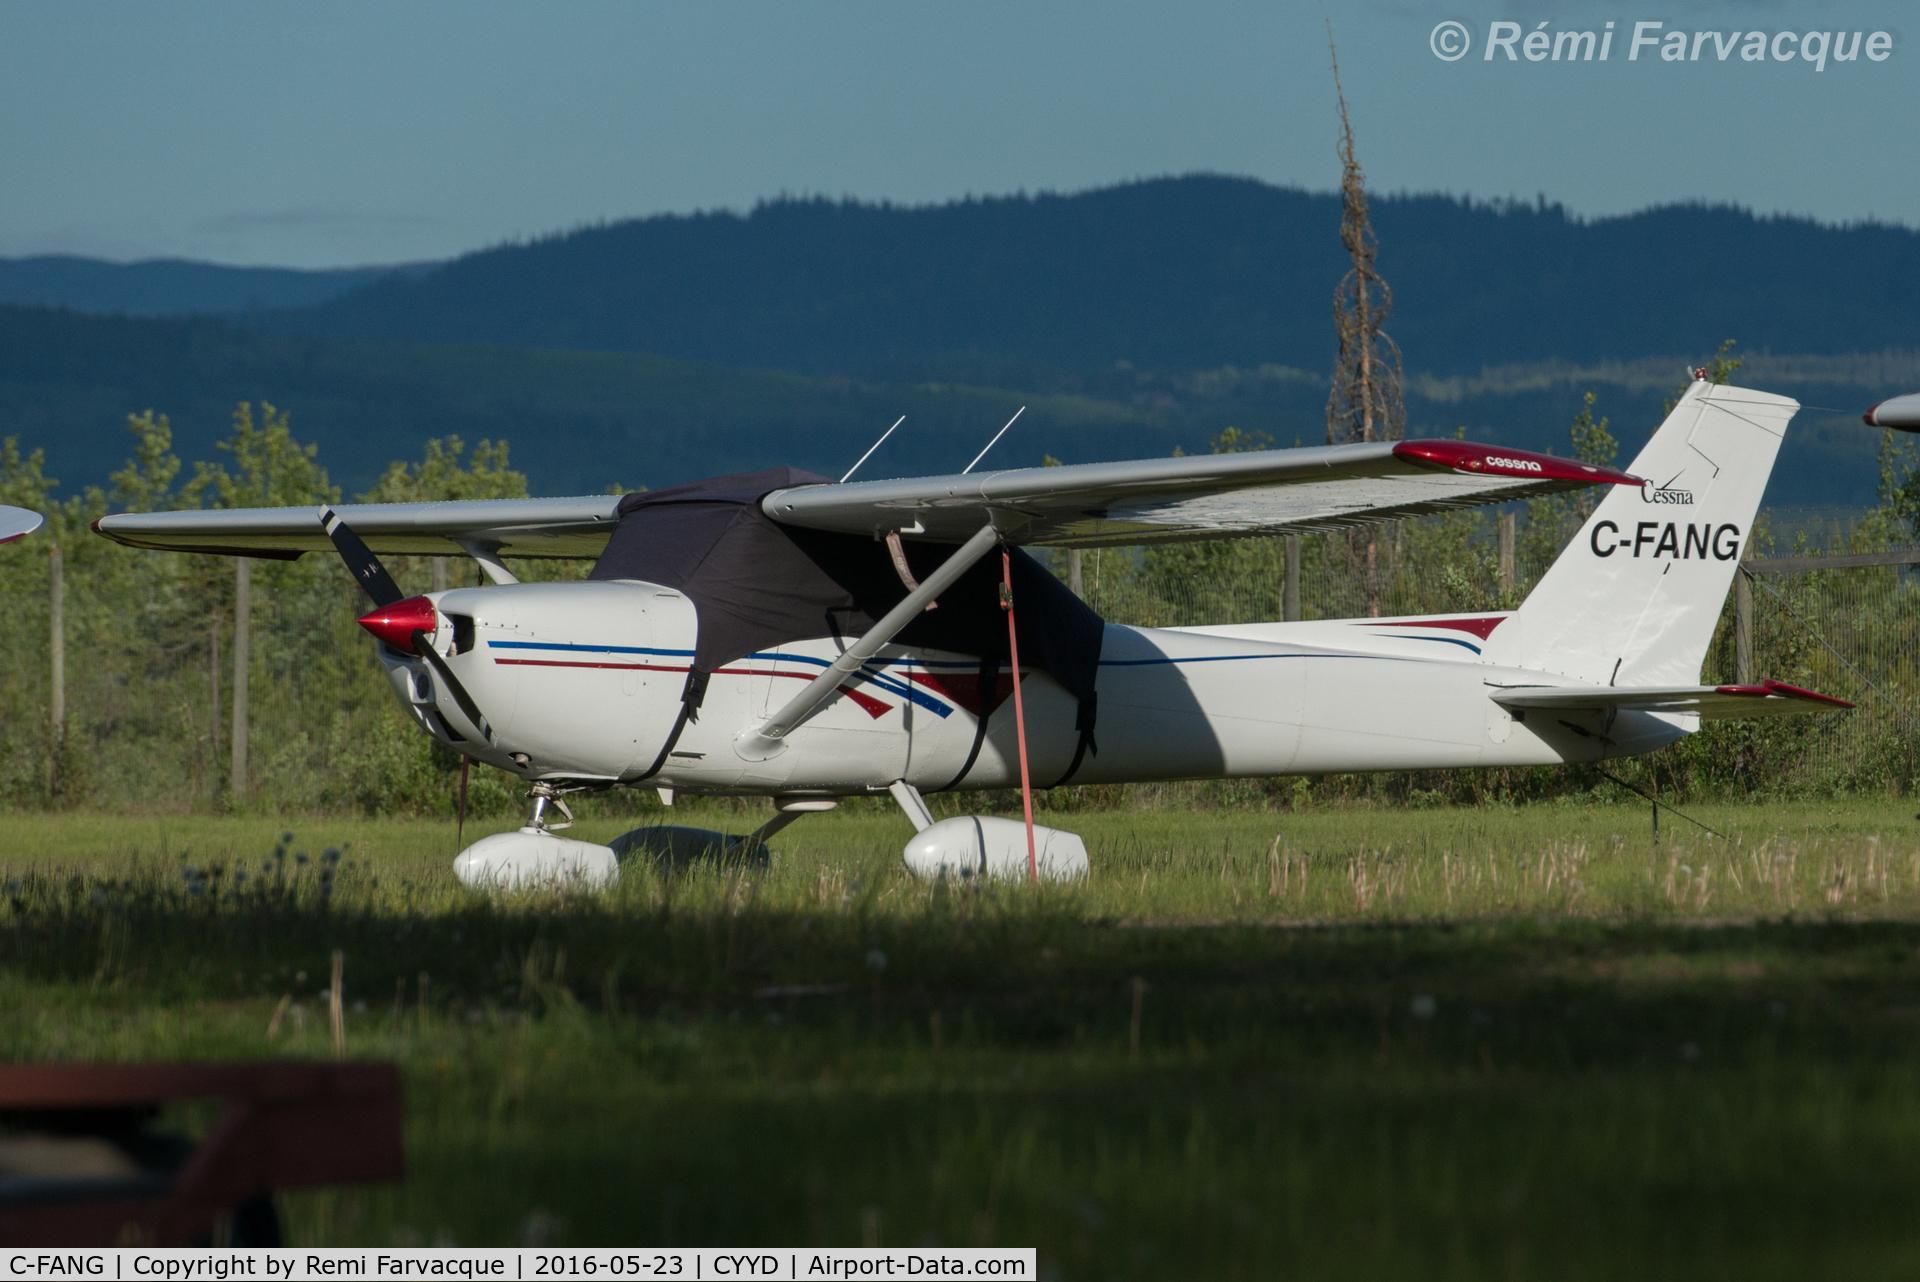 C-FANG, 1975 Cessna 150M C/N 15076112, Parked at east end of airport in private craft area.